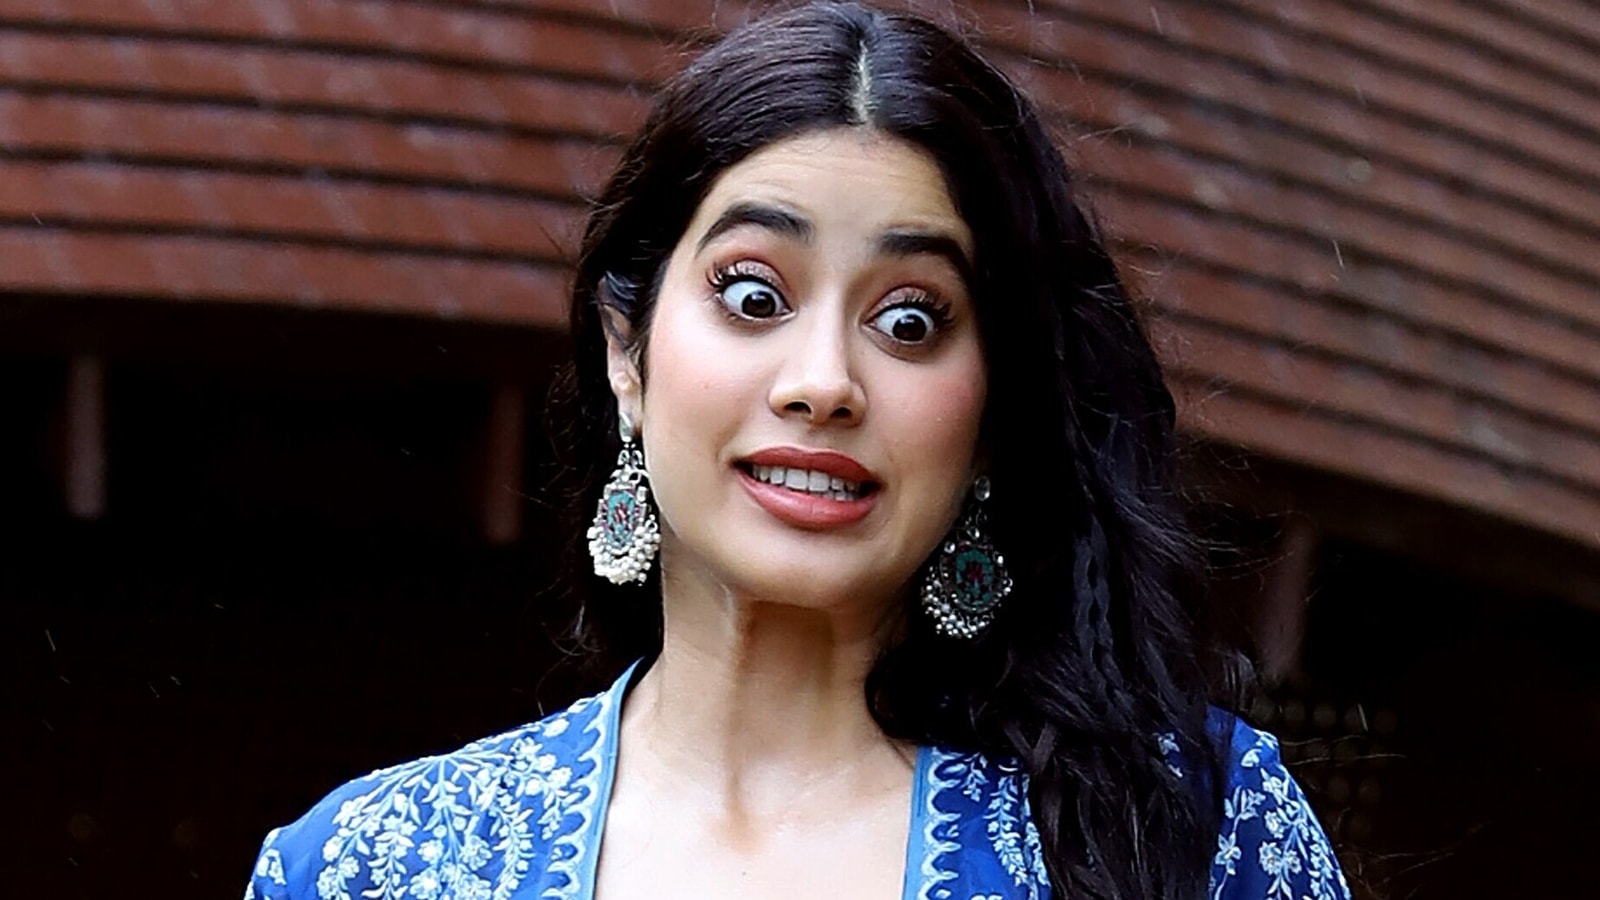 Janhvi Kapoor says it’d be odd to star opposite Shah Rukh Khan, Aamir Khan, Salman Khan: ‘They are biggest stars but…’